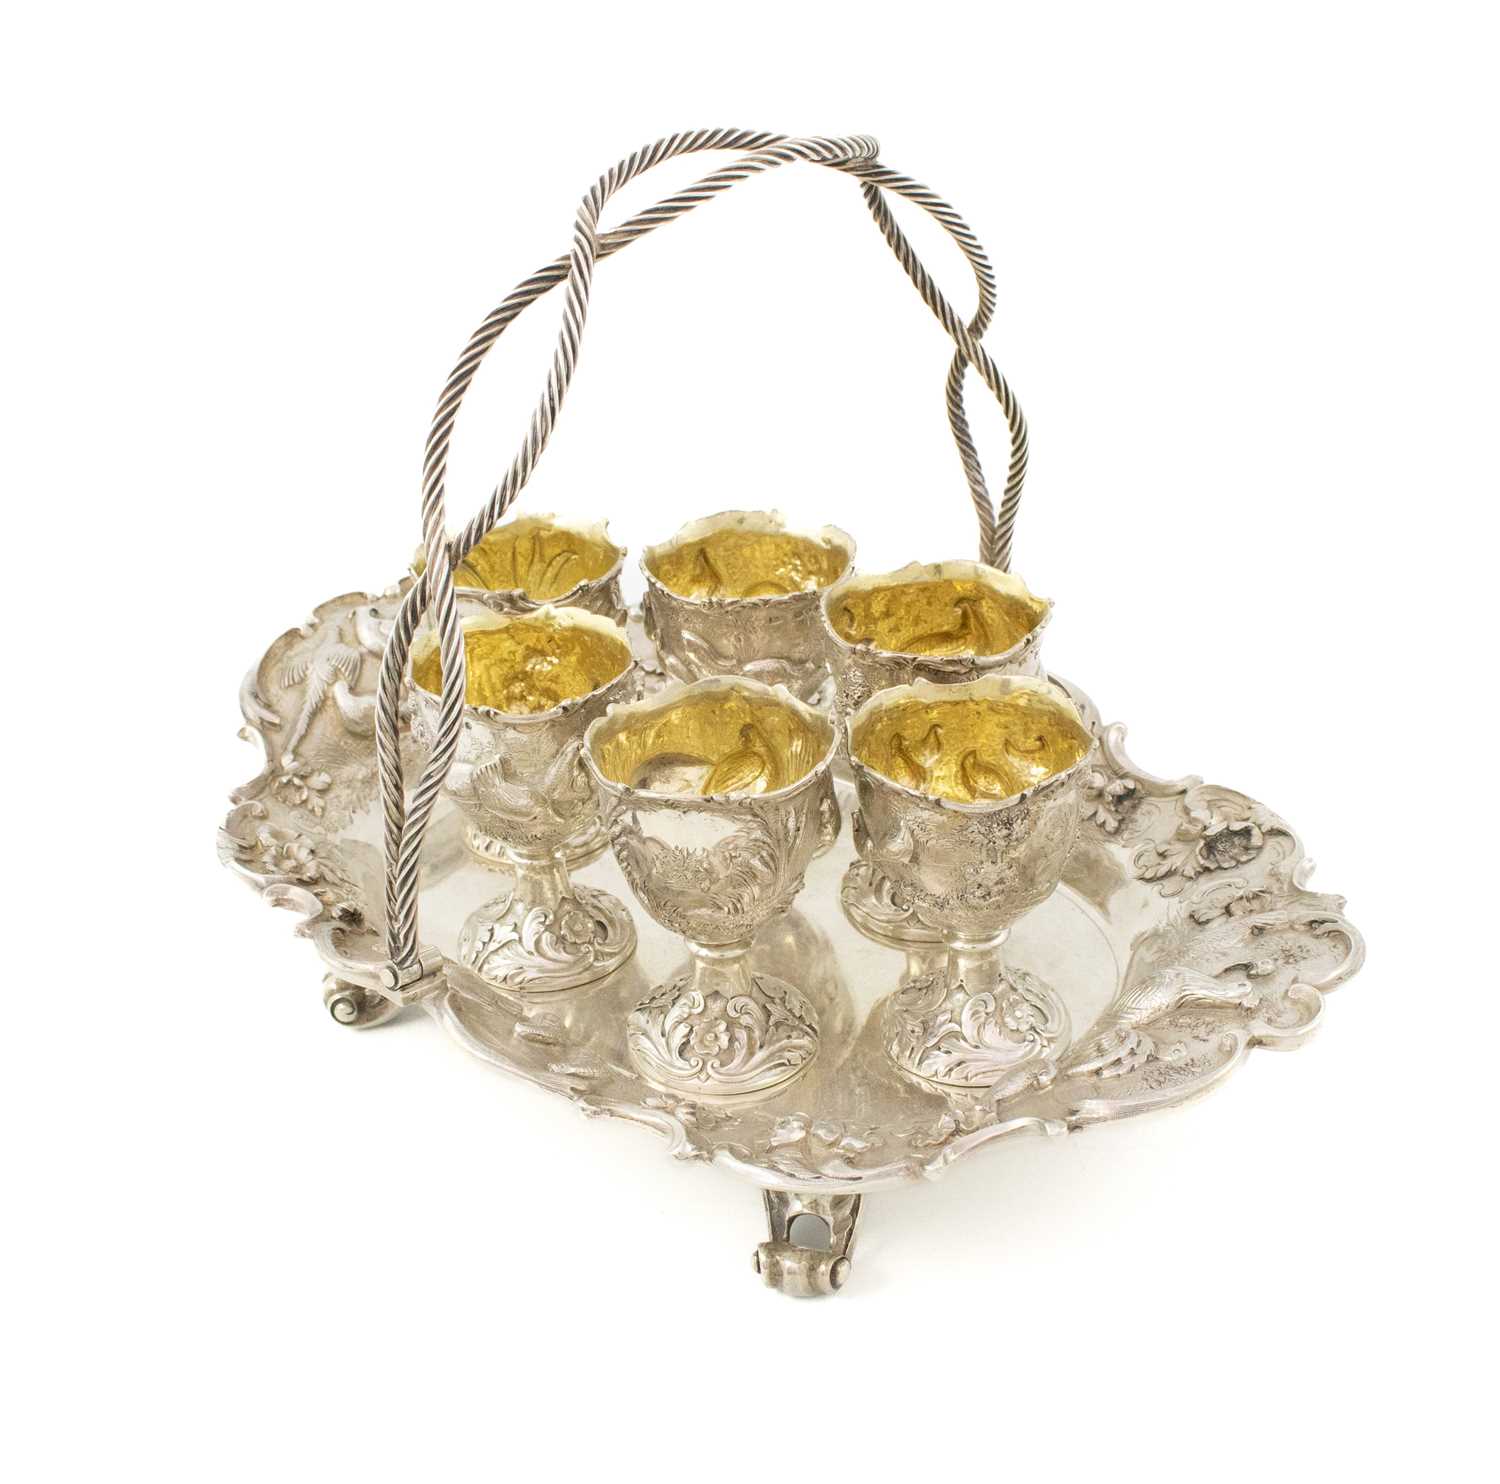 A Victorian silver six-egg cup cruet stand, by Robert Hennell, London 1855, shaped oblong form the